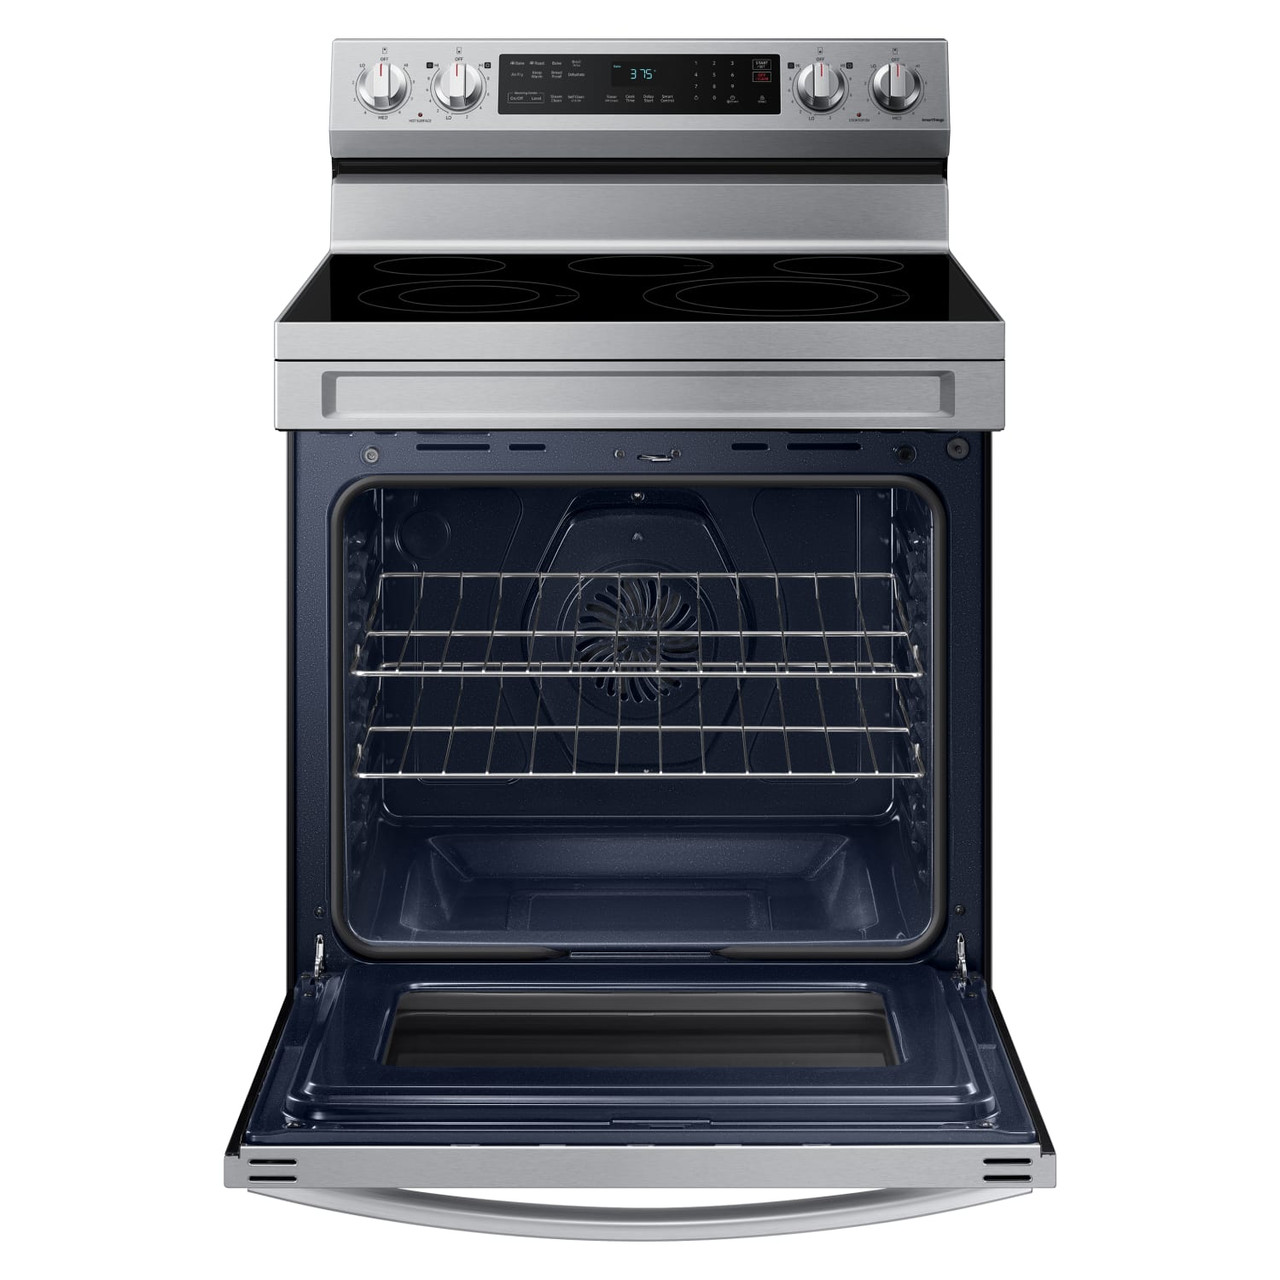 Samsung 6.3 cu. ft. Smart Freestanding Electric Range with No Pre-heat Air Fry & Convection - Stainless Steel